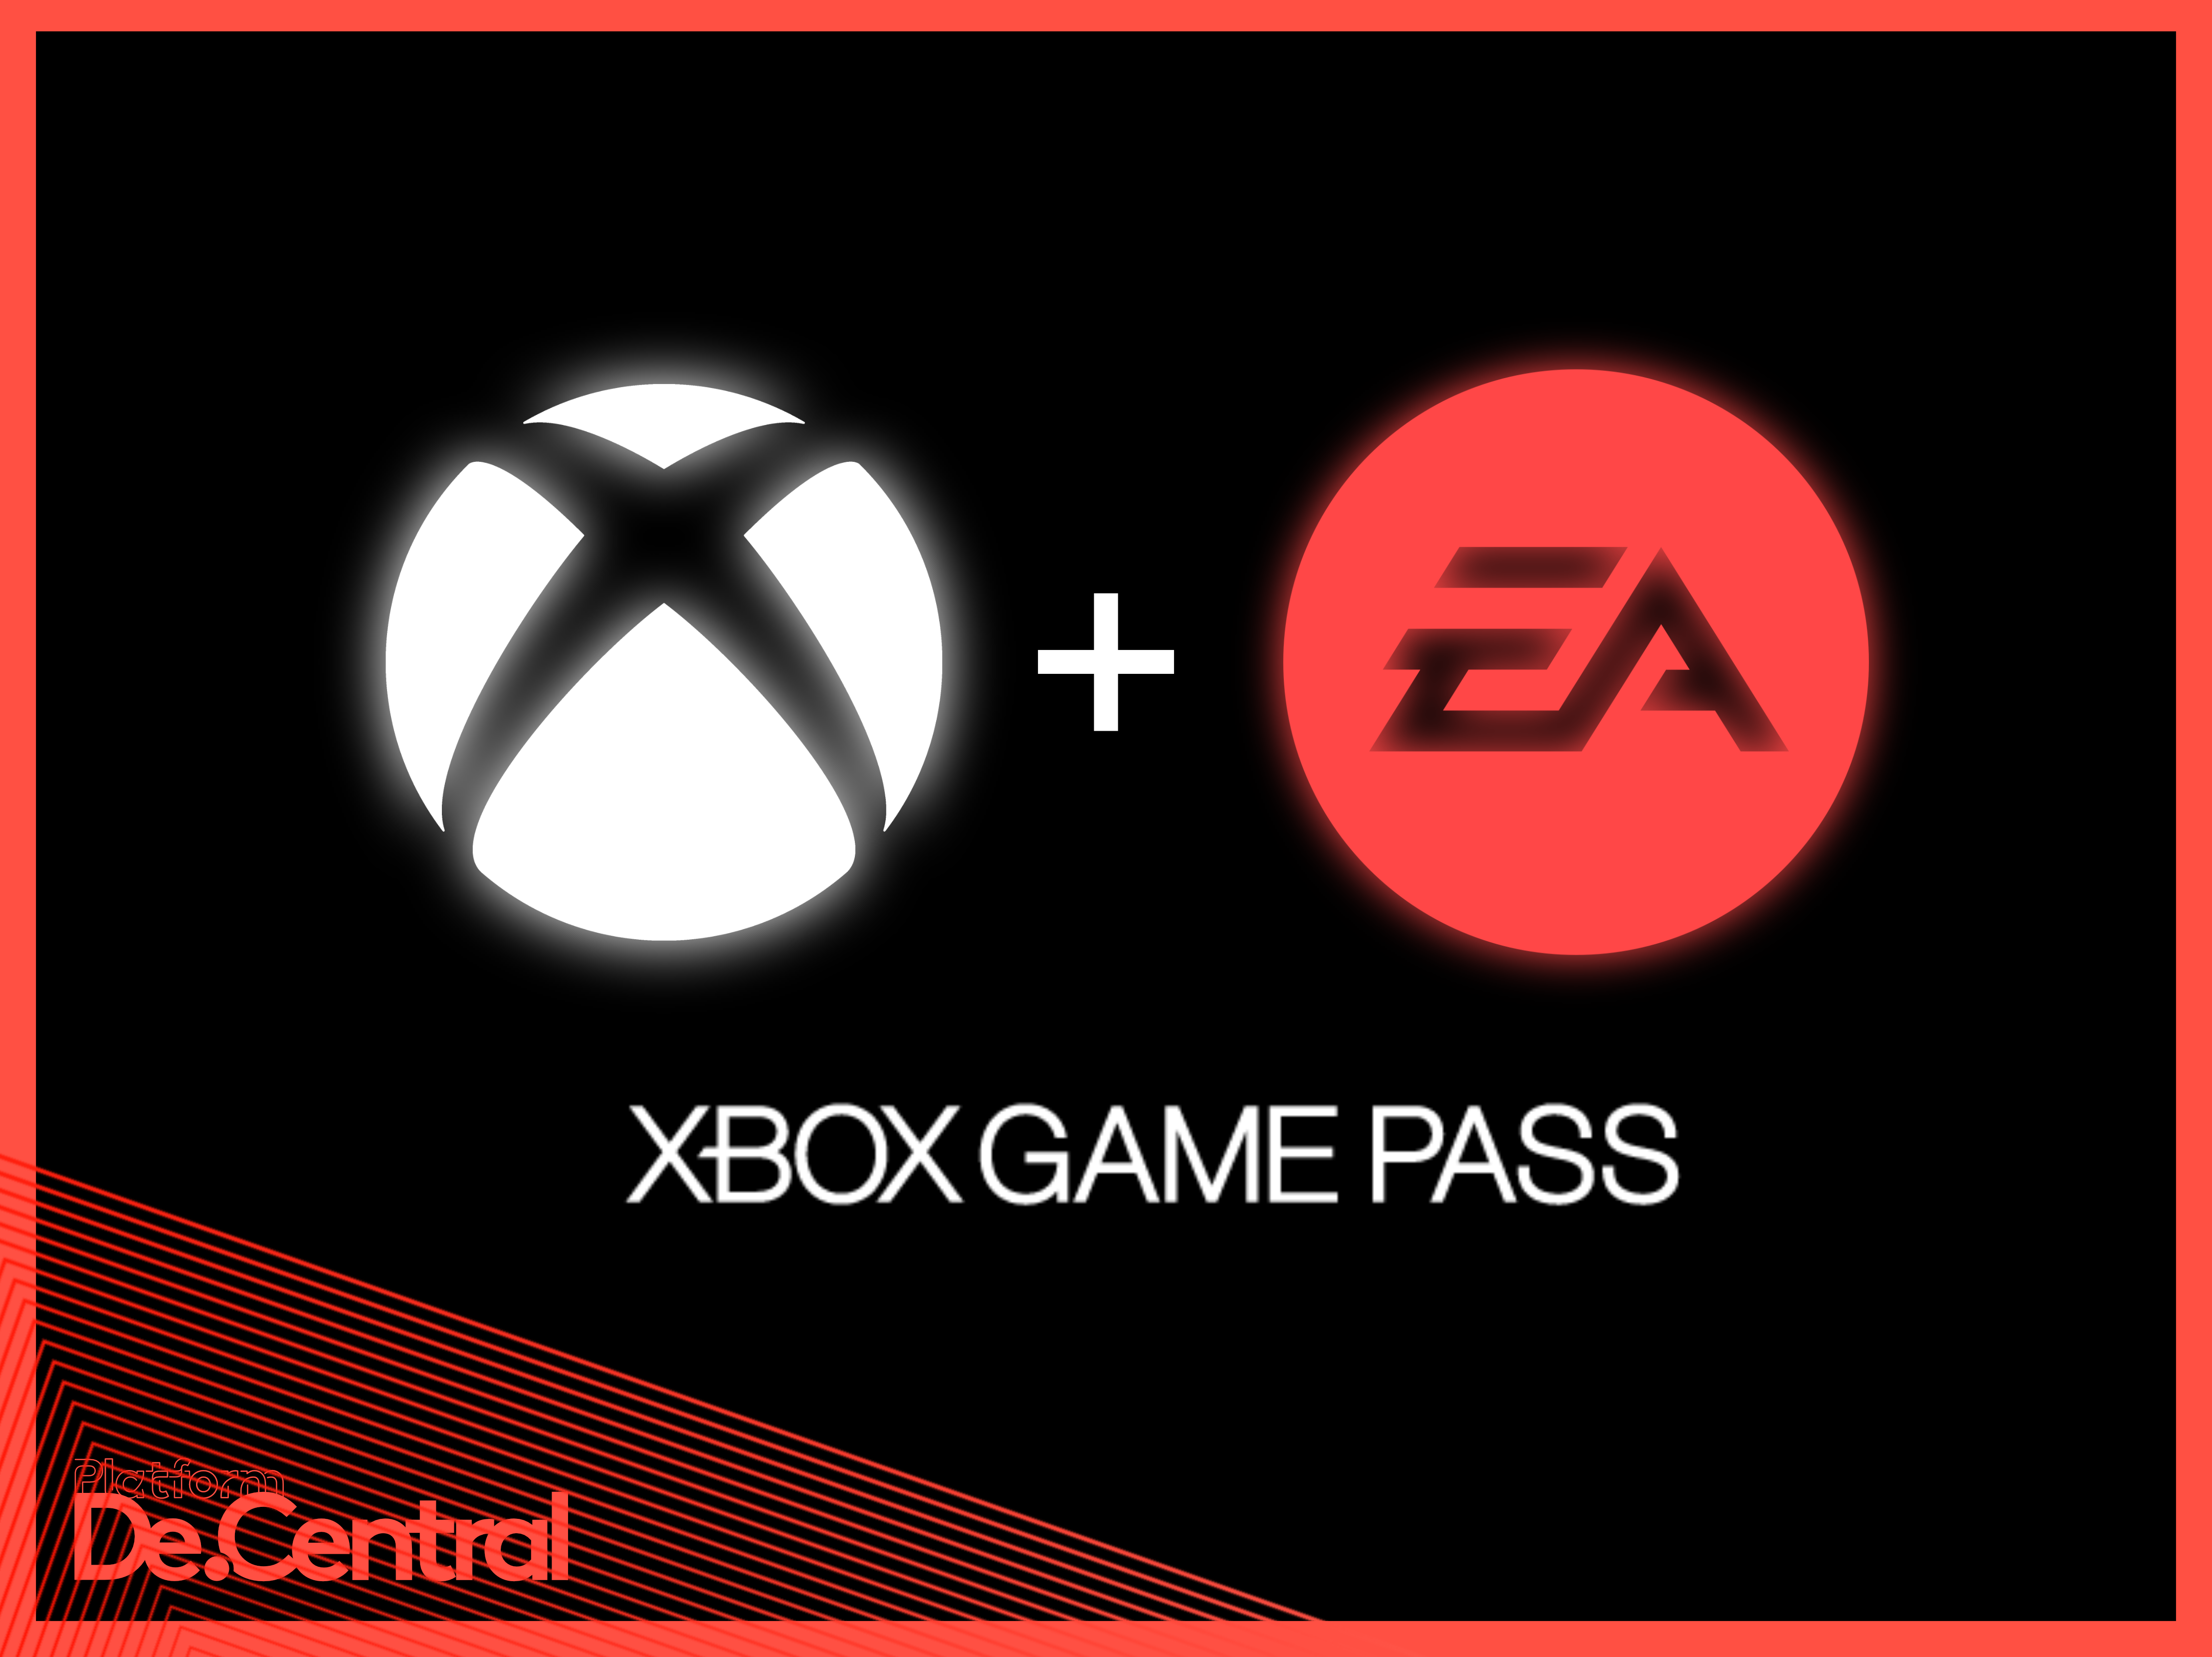 Xbox Game Pass Ultimate now includes EA Play